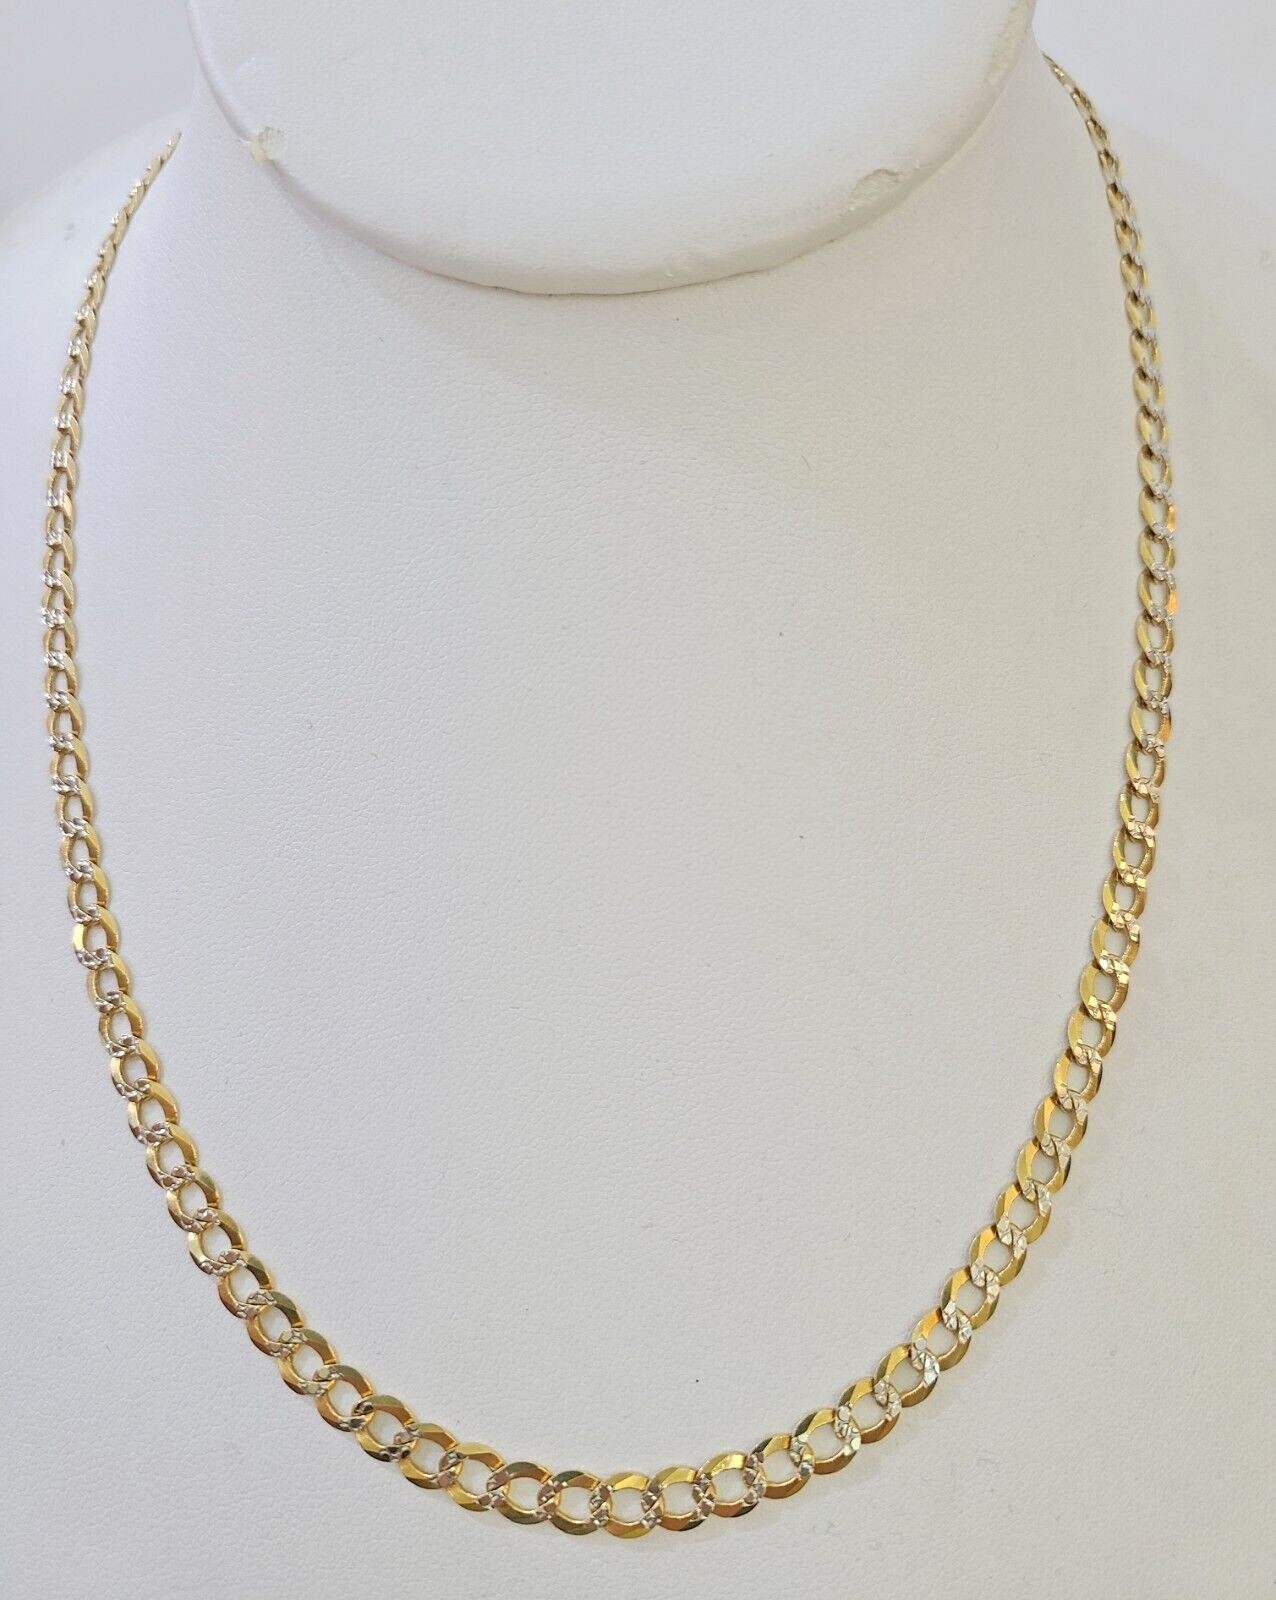 REAL 14k Cuban Curb Link necklace with Diamond Cuts 22 inches 6mm 14kt